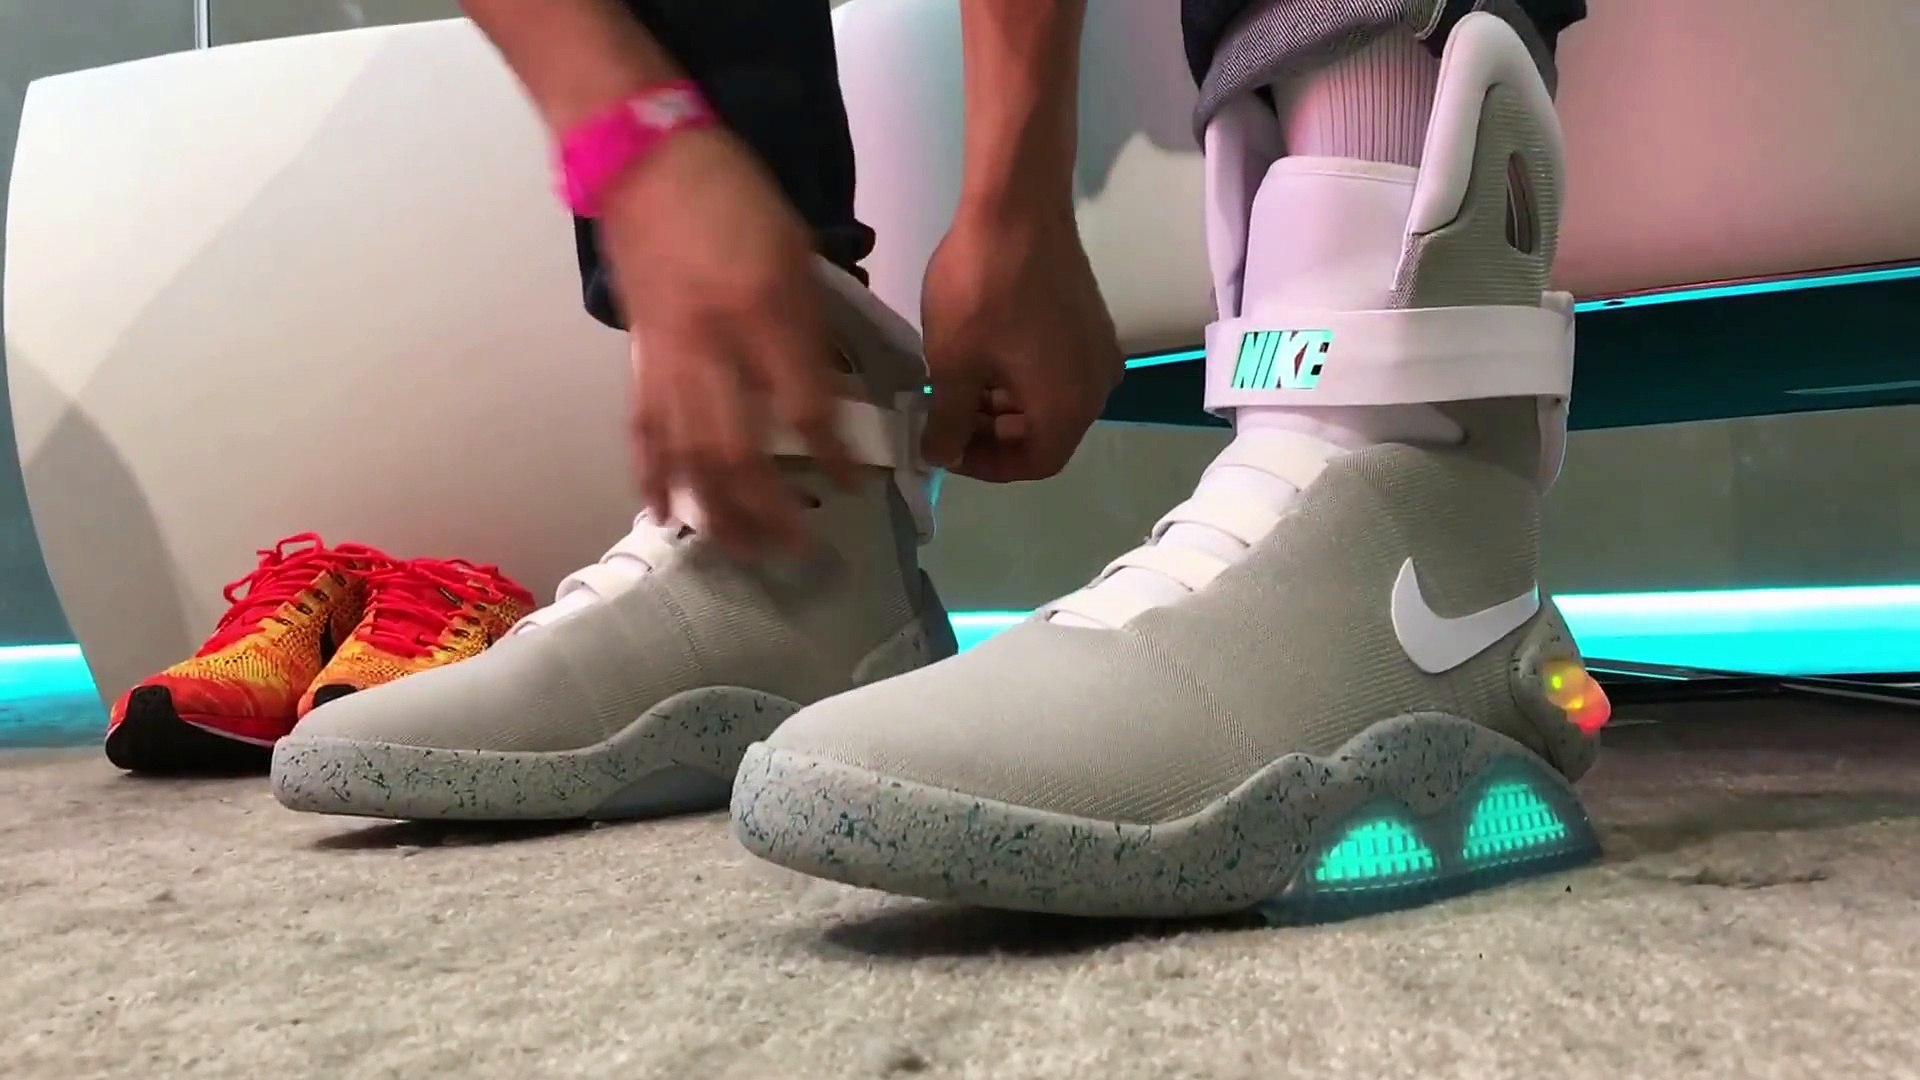 We wear-test the self-lacing Nike MAG. It's awesome! - video Dailymotion